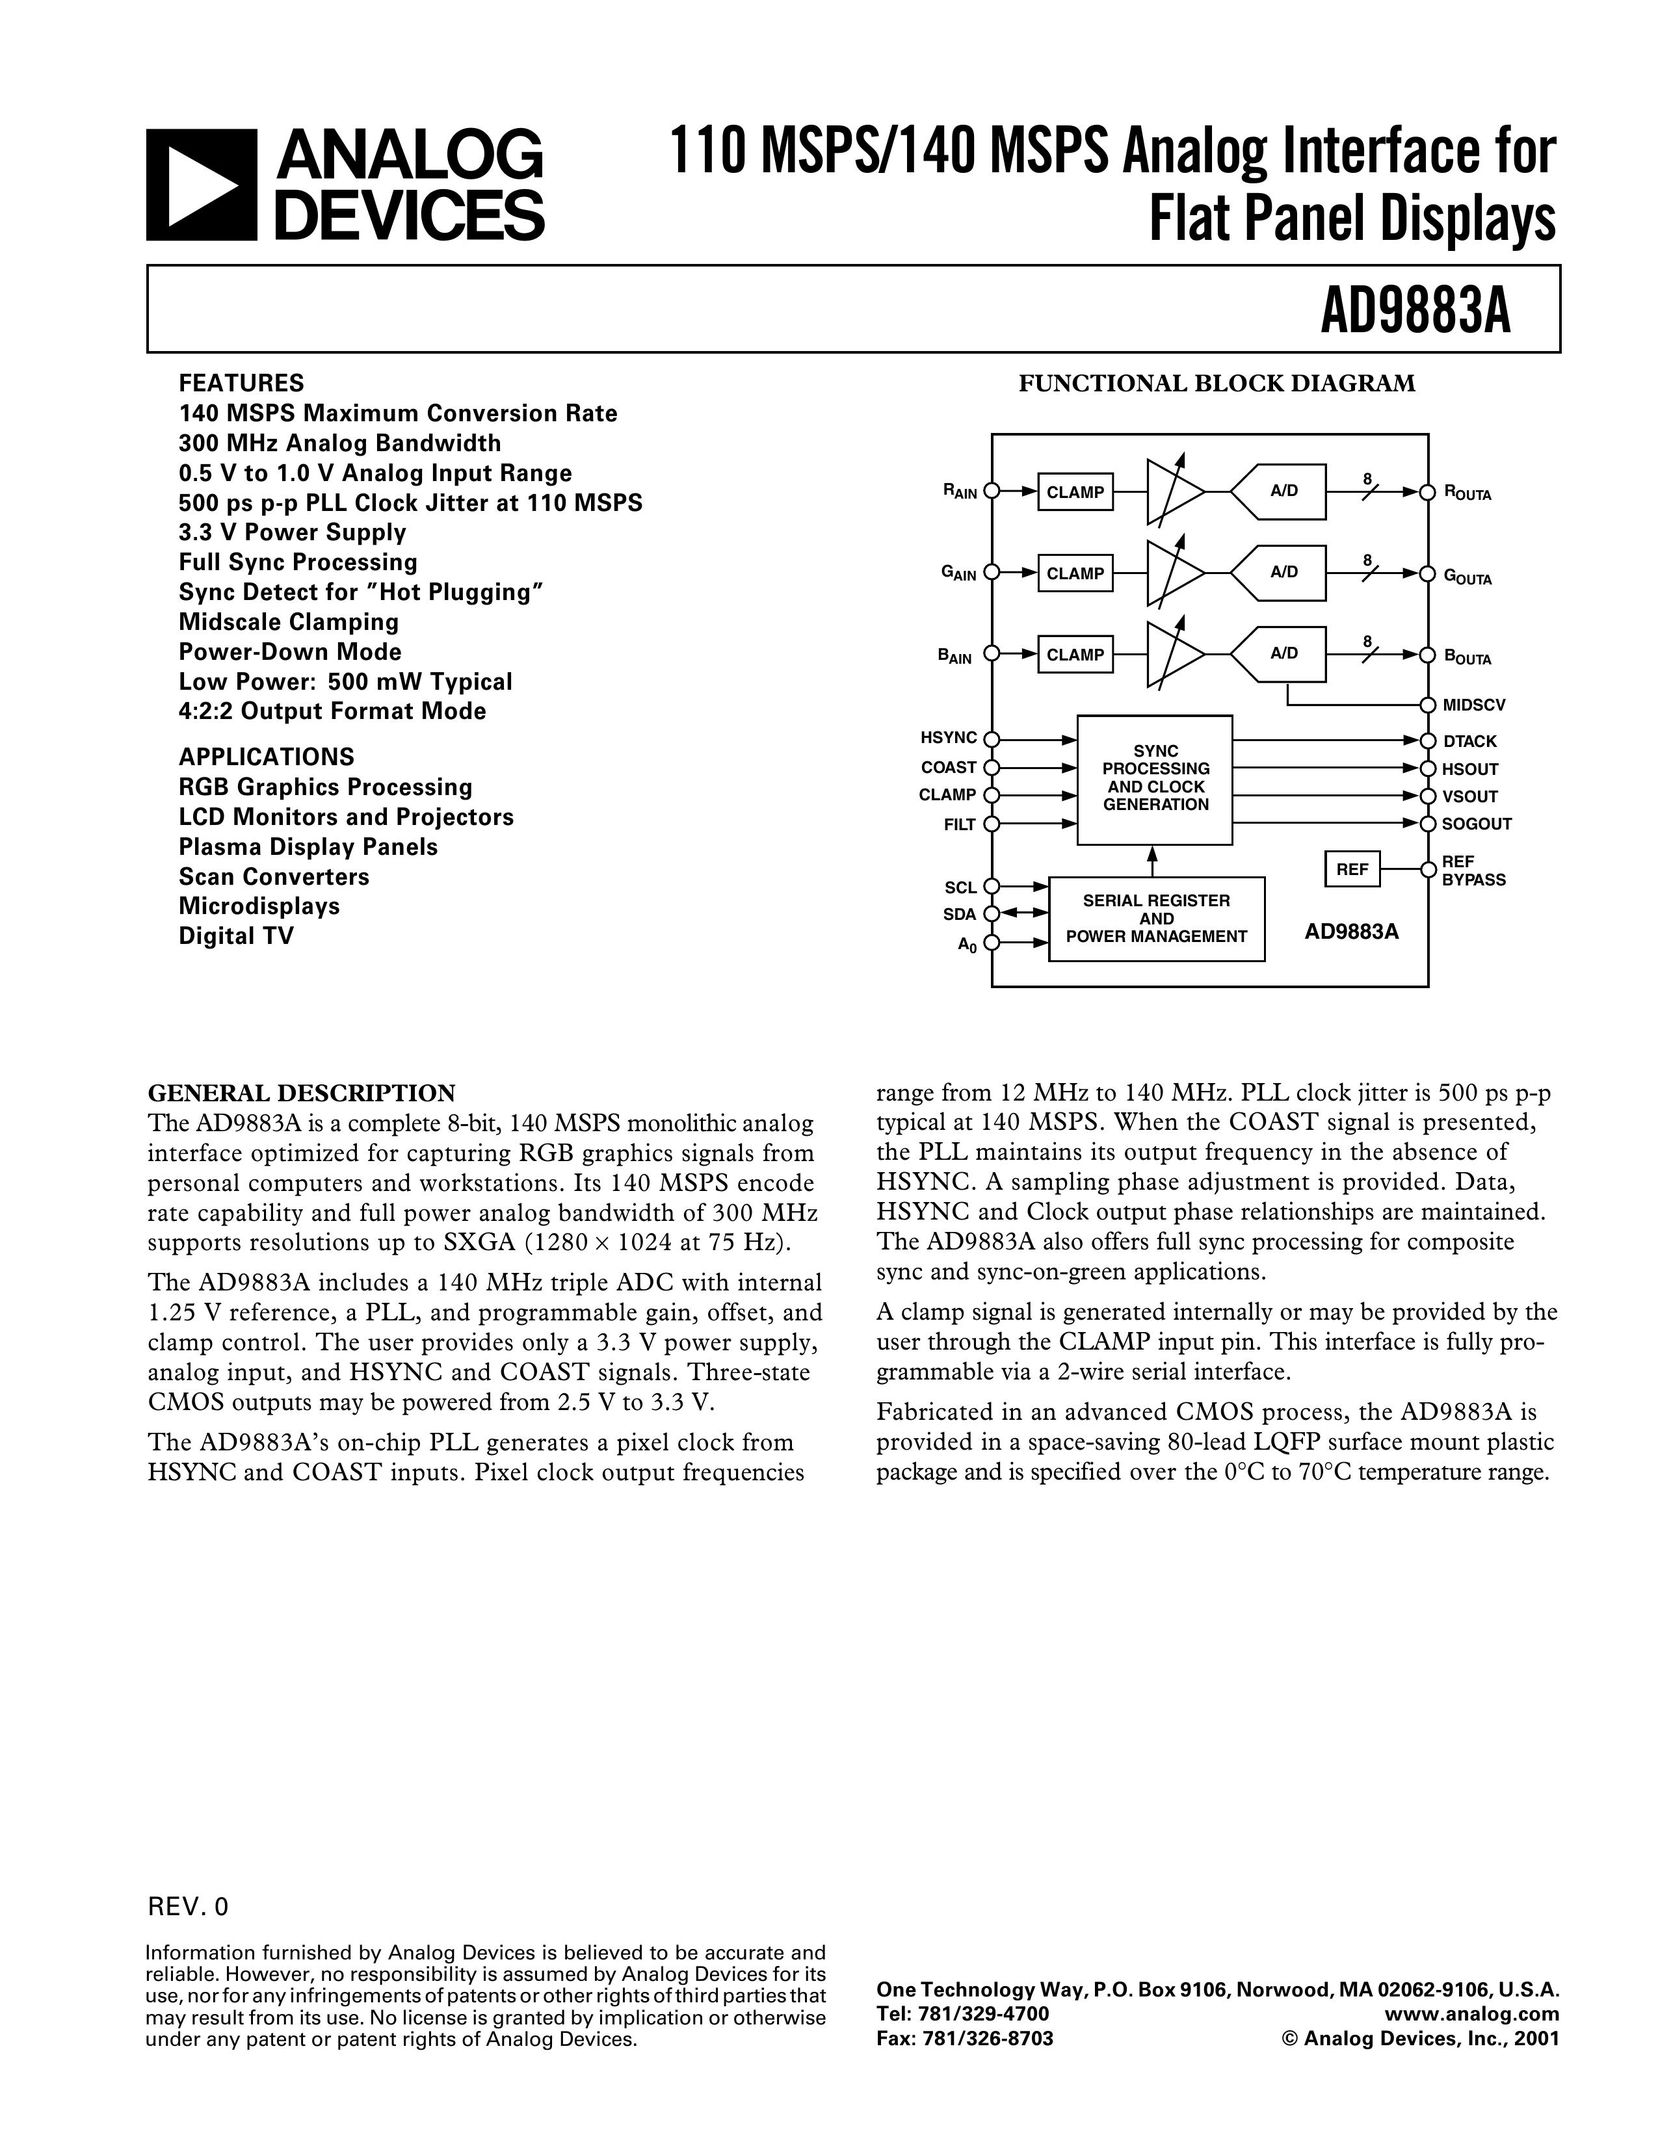 Analog Devices AD9883A Computer Hardware User Manual